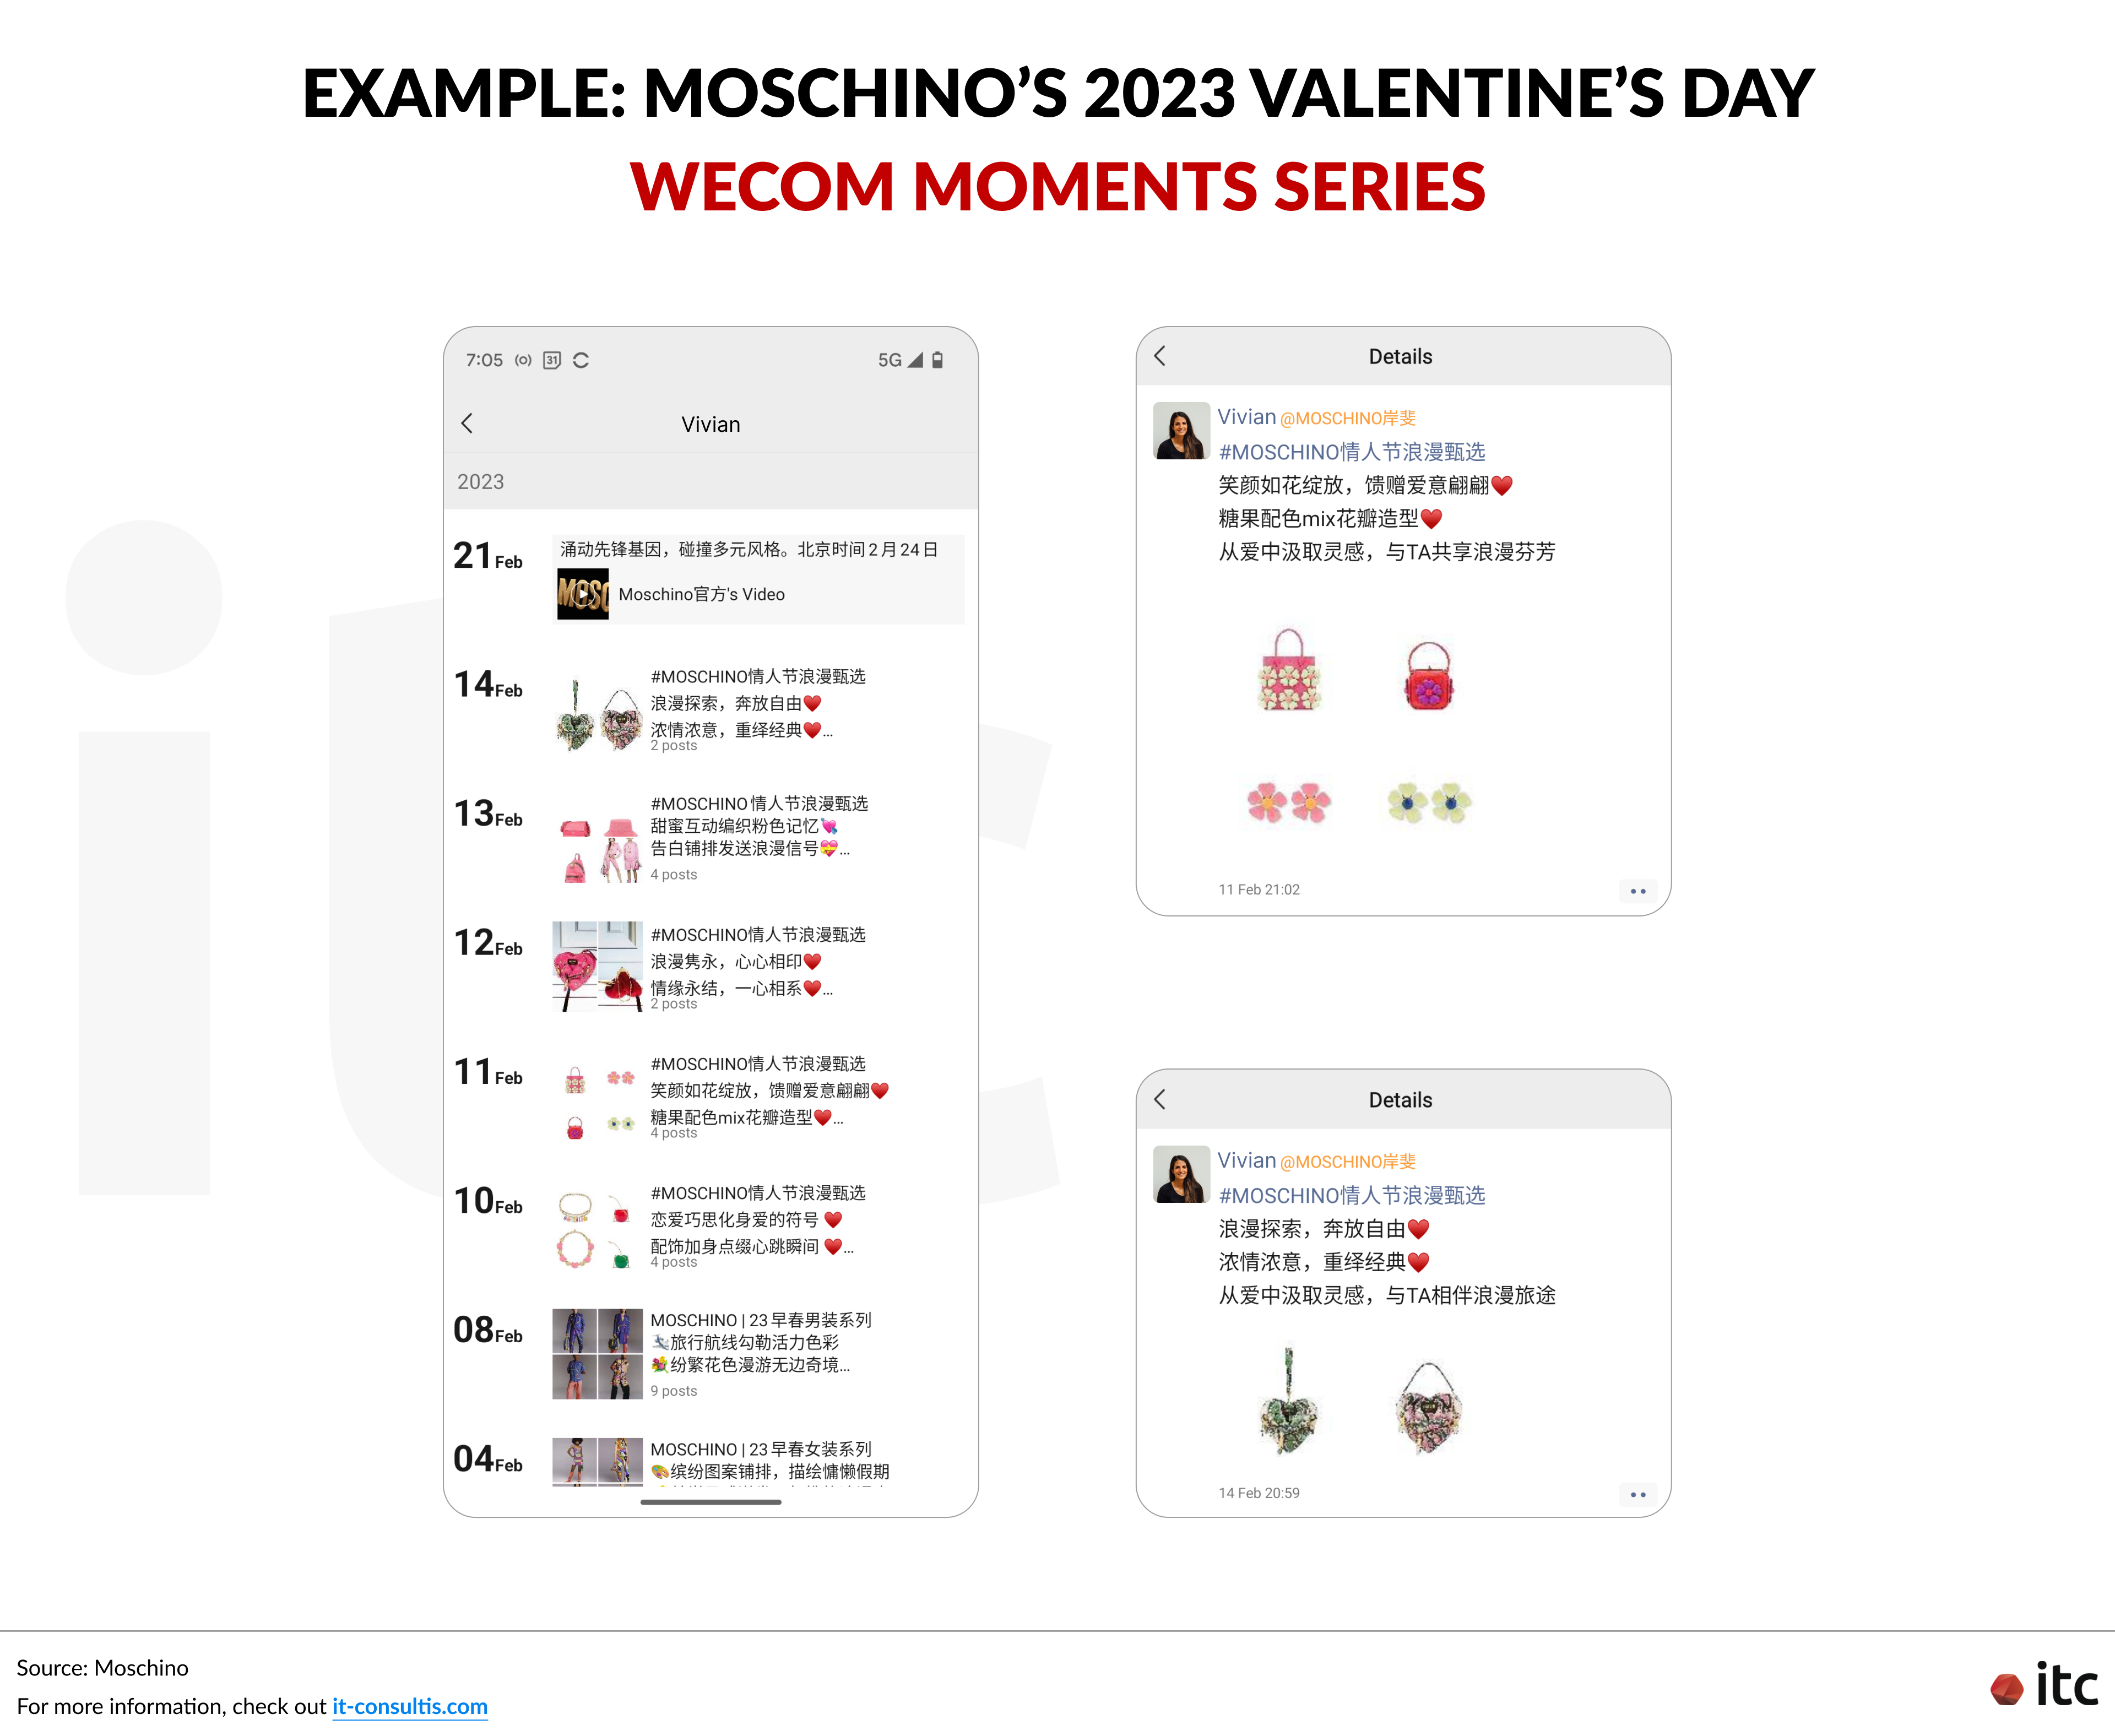 Example: Moschino's 2023 Valentine's Day WeCom Moments series